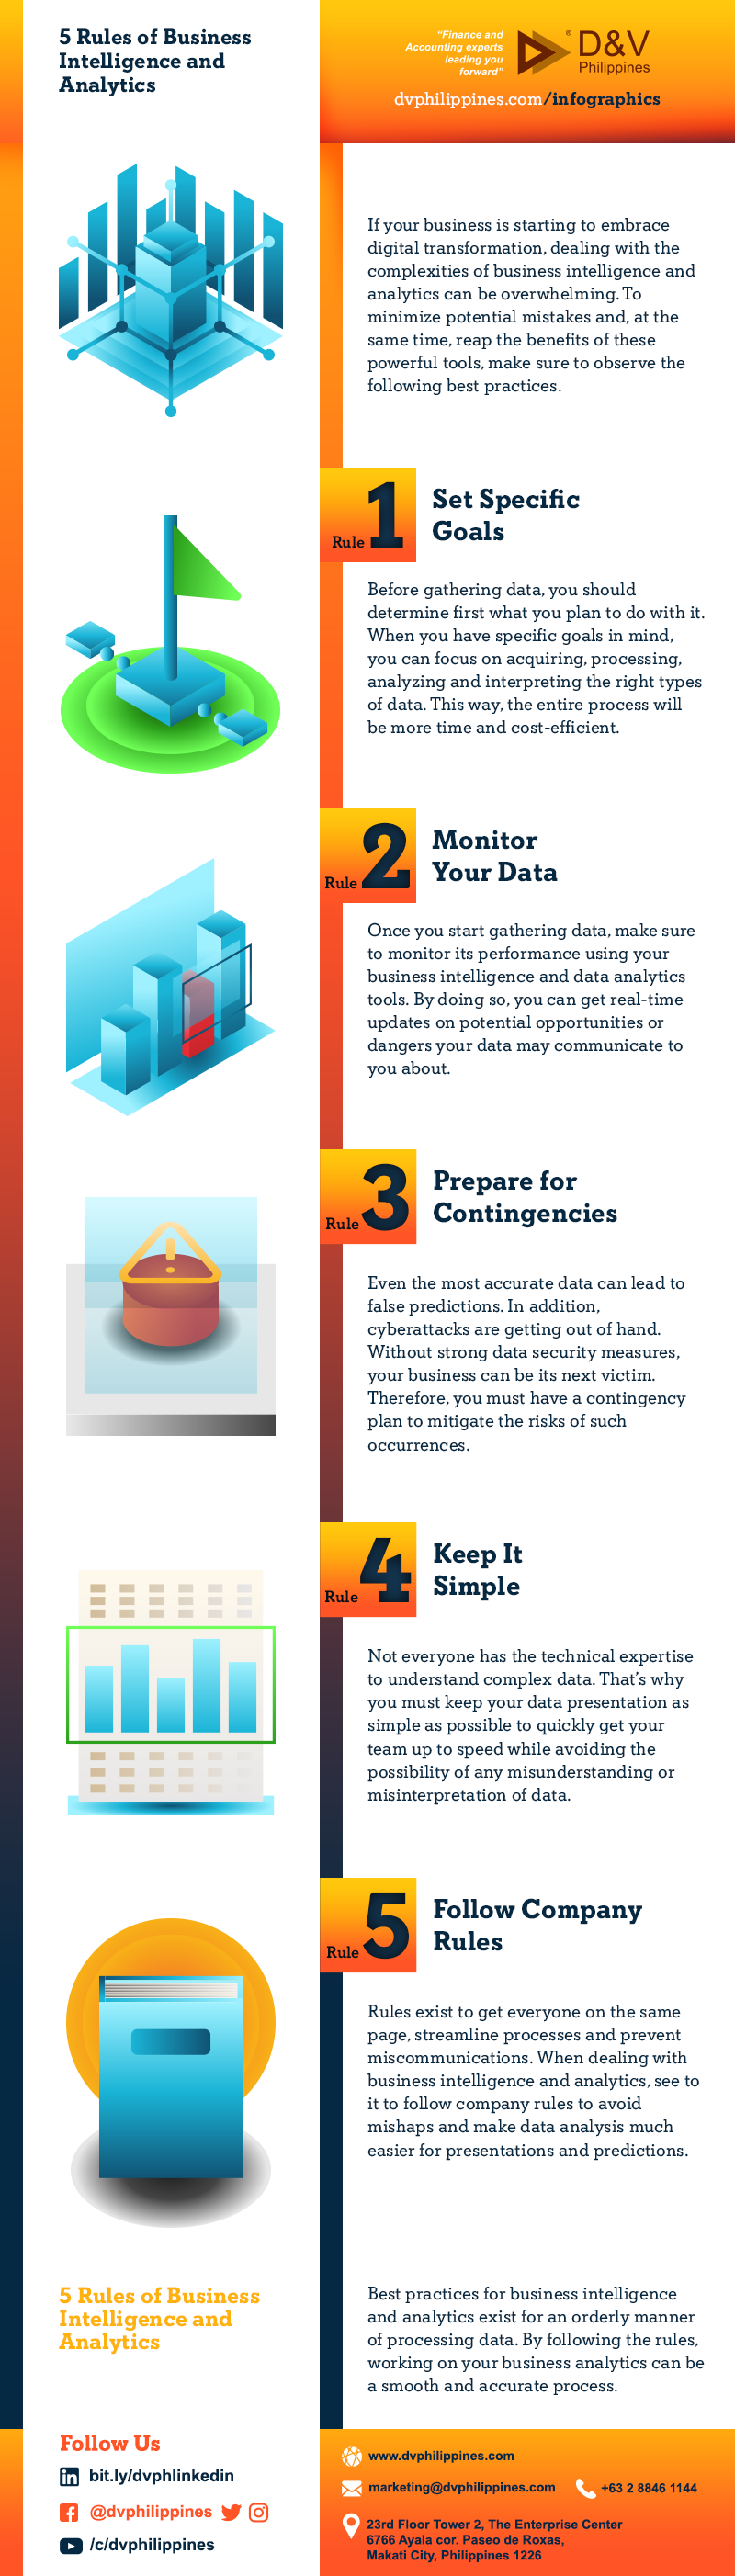 DV_Infog_Web_061522_5-Rules-of-Business-Intelligence-and-Analytics_Content